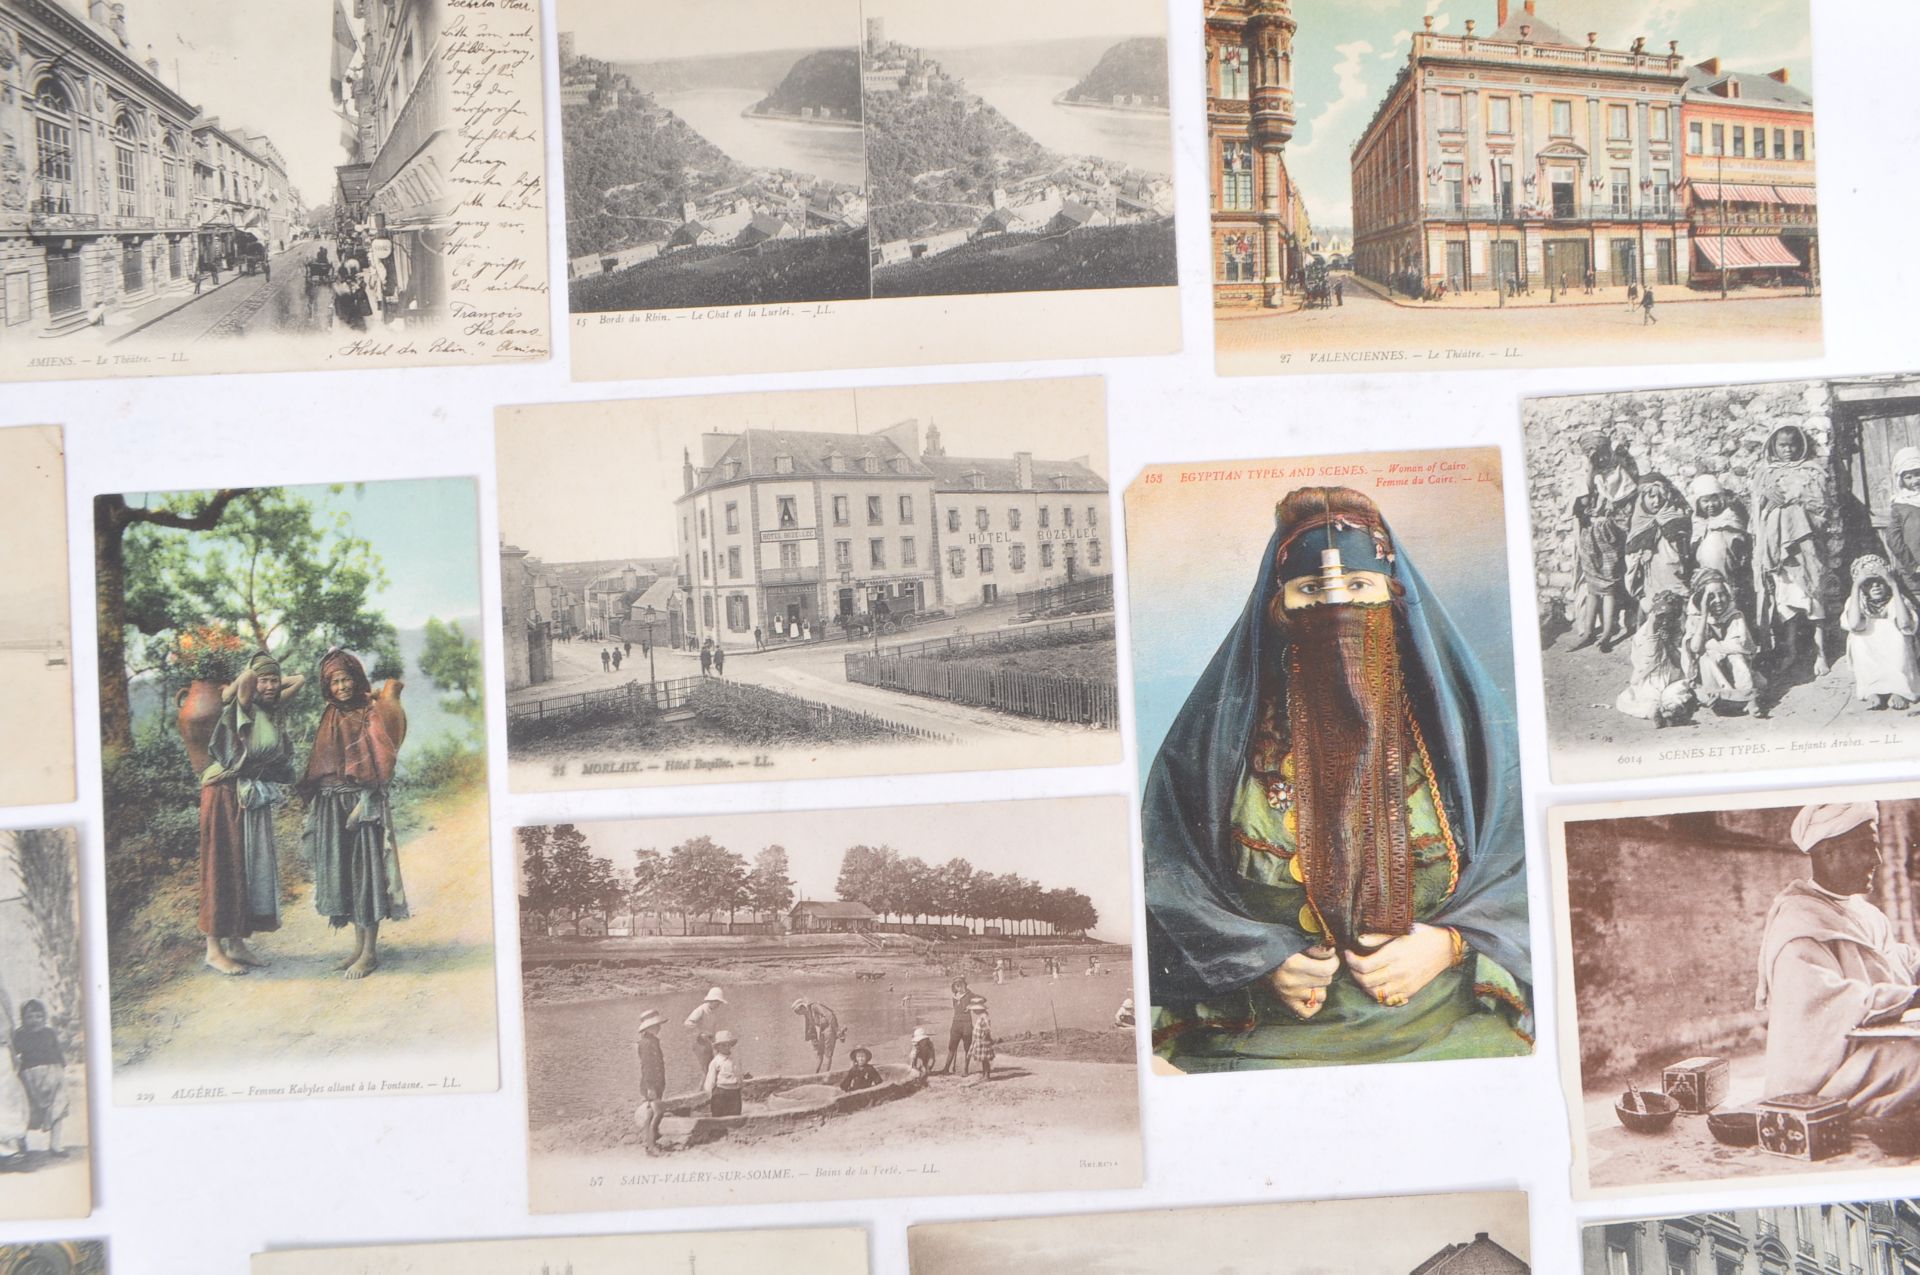 LL - Pre 1930s Postcards published by Leon and Levy also known as Louis Levy. - Image 10 of 16